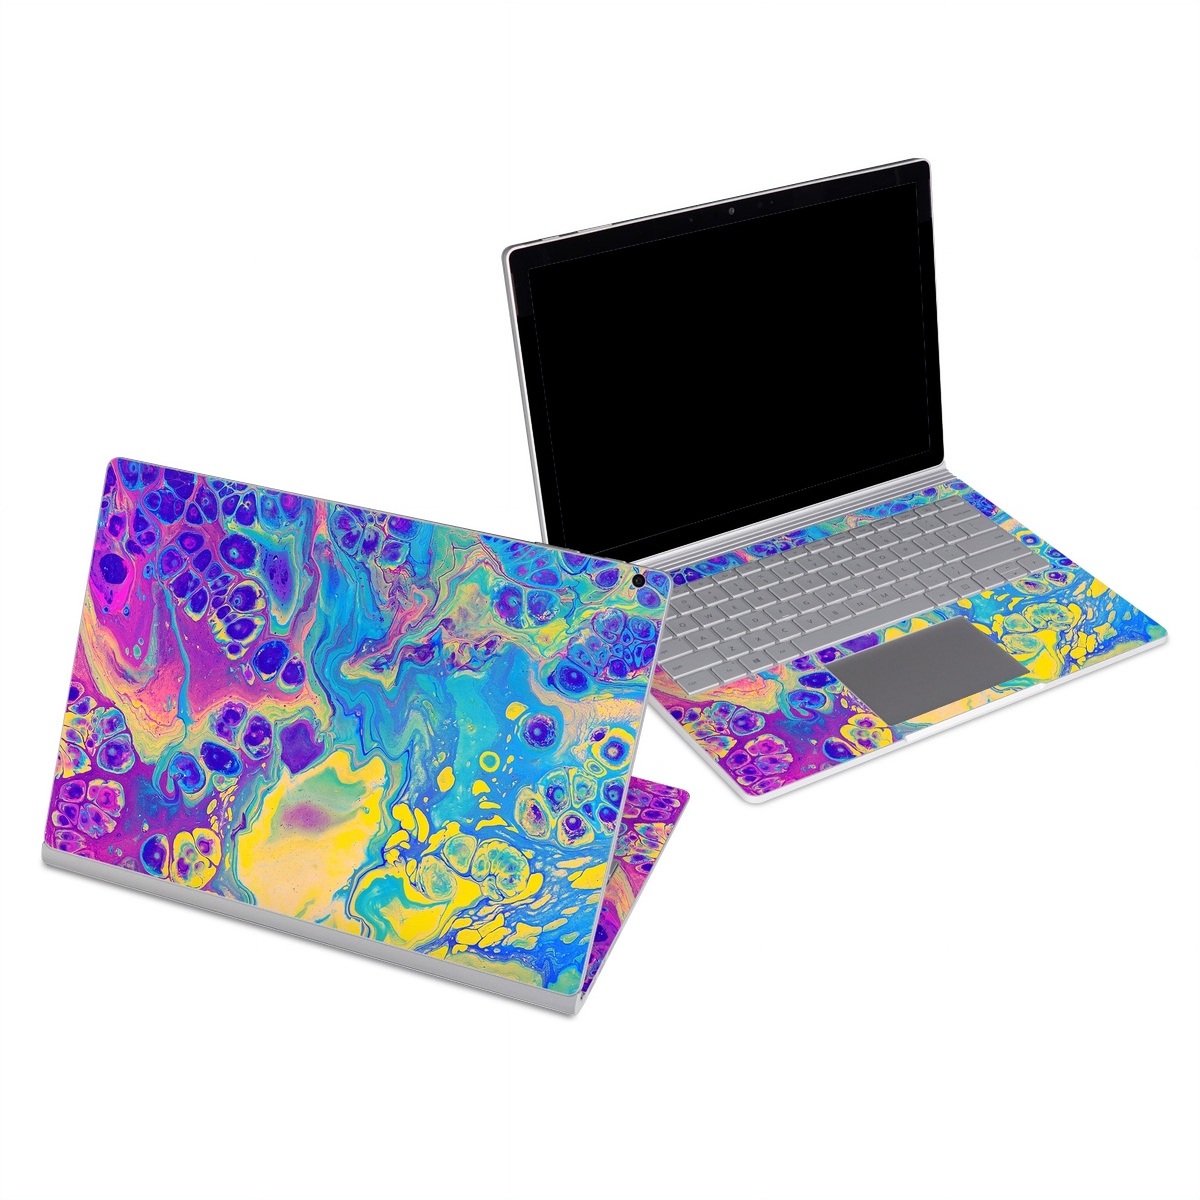 Microsoft Surface Book Series Skin design of Psychedelic art, Pattern, Purple, Visual arts, Design, Art, Fractal art, Electric blue, Graphic design, Graphics, with blue, yellow, purple, pink colors